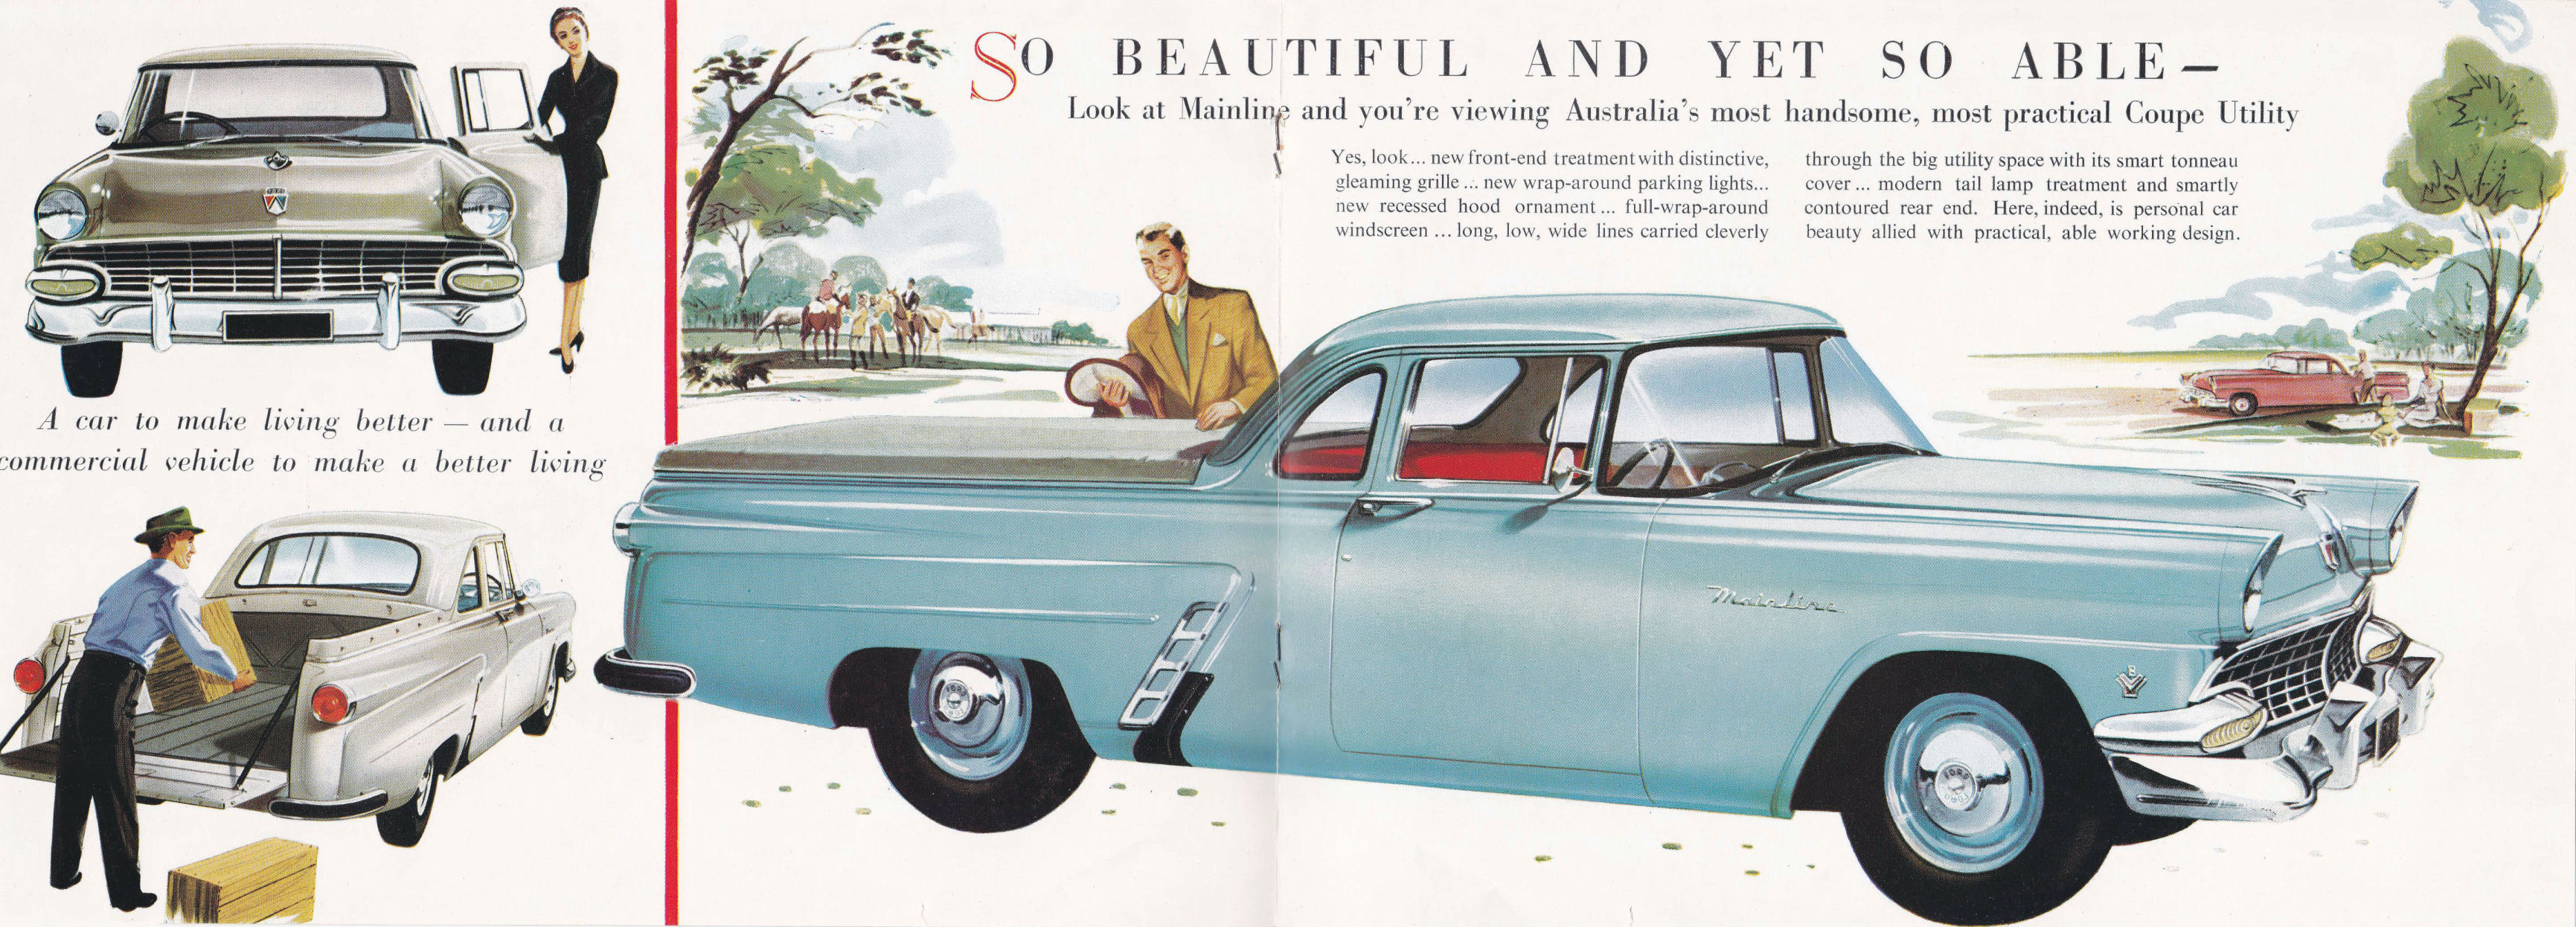 1956_Ford_Malnline_Coupe_Utility_Aus-06-07